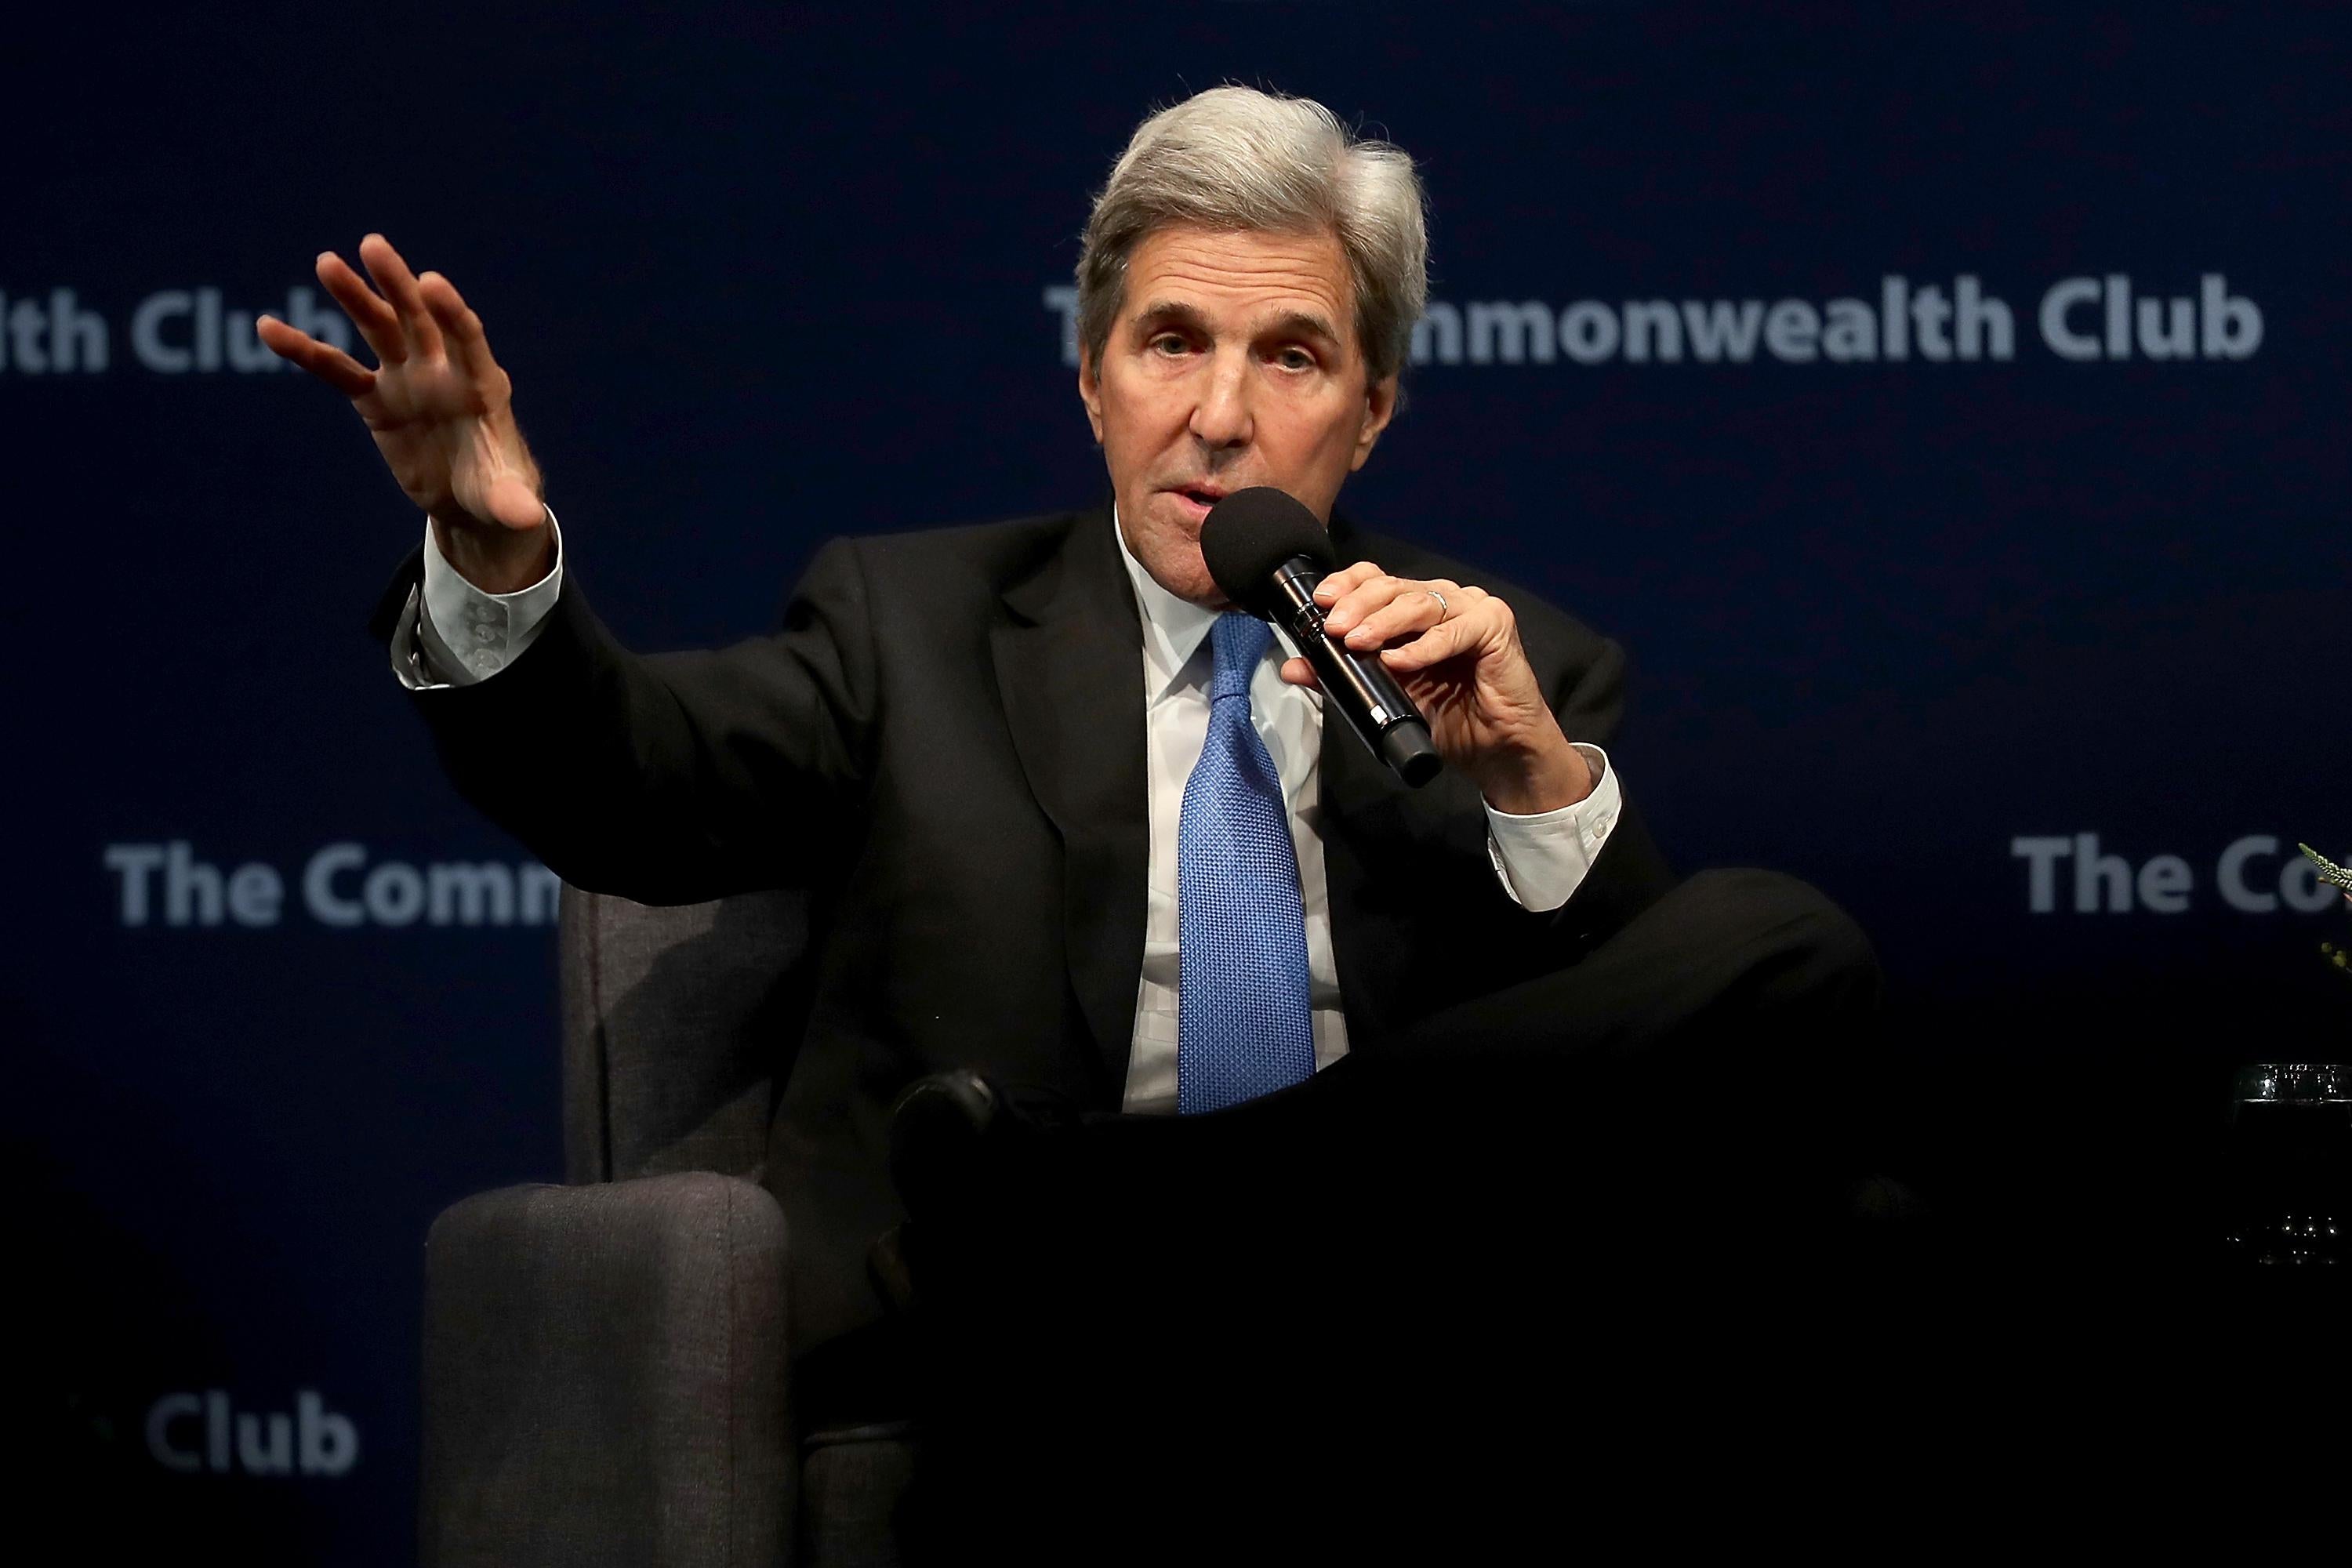 Former Secretary of State John Kerry speaks during a Commonwealth Club of California event at the Marines' Memorial Theatre on September 13, 2018 in San Francisco, California. 